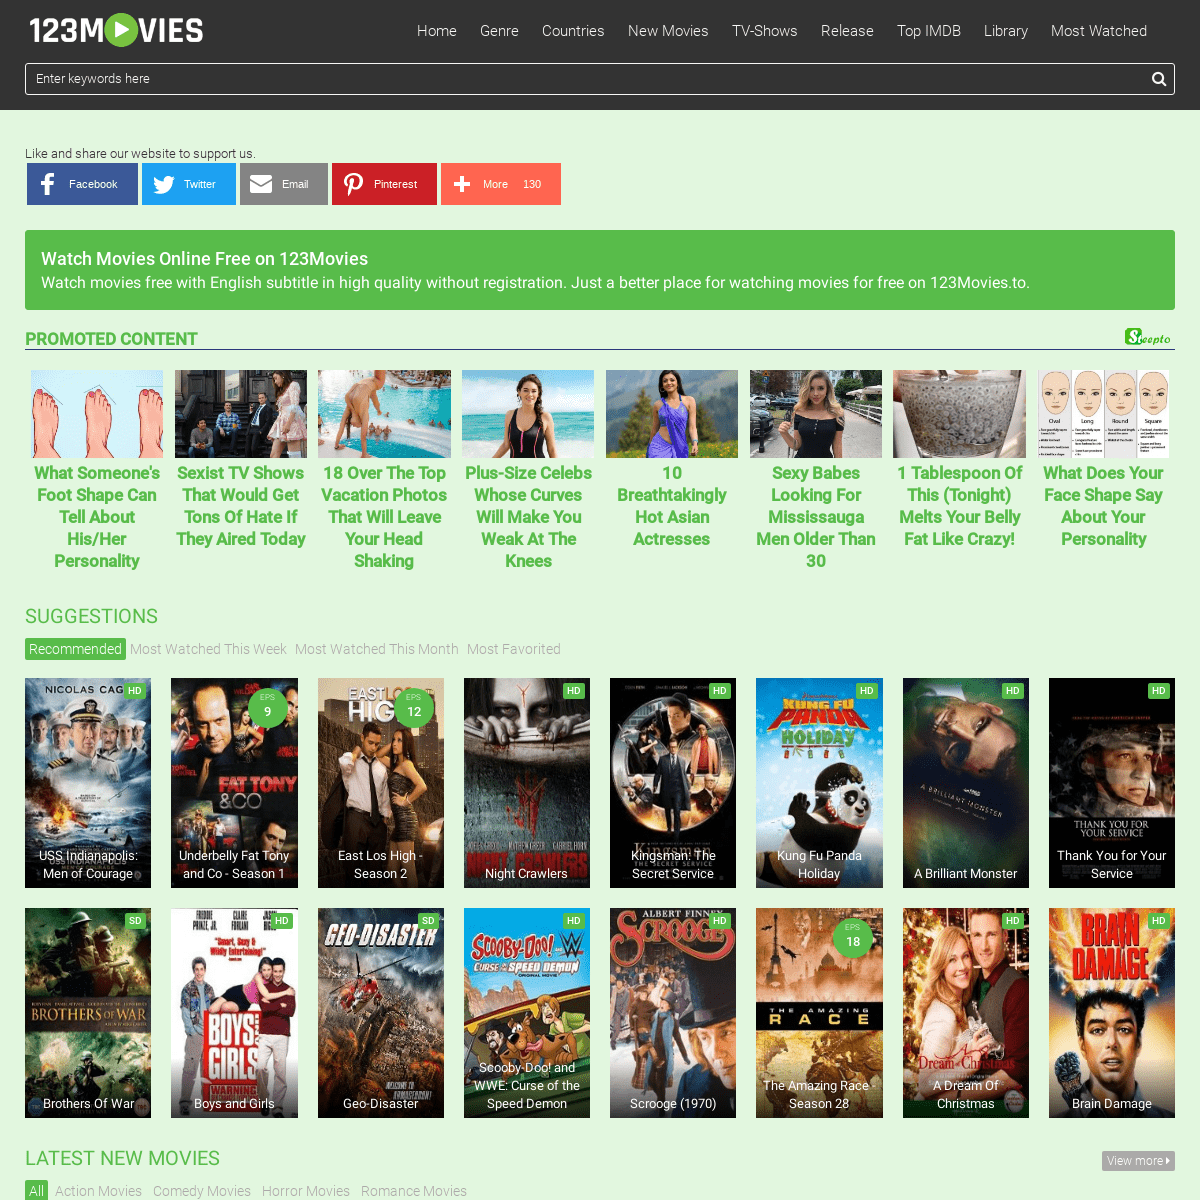 Watch Movies Online Free on 123Movies